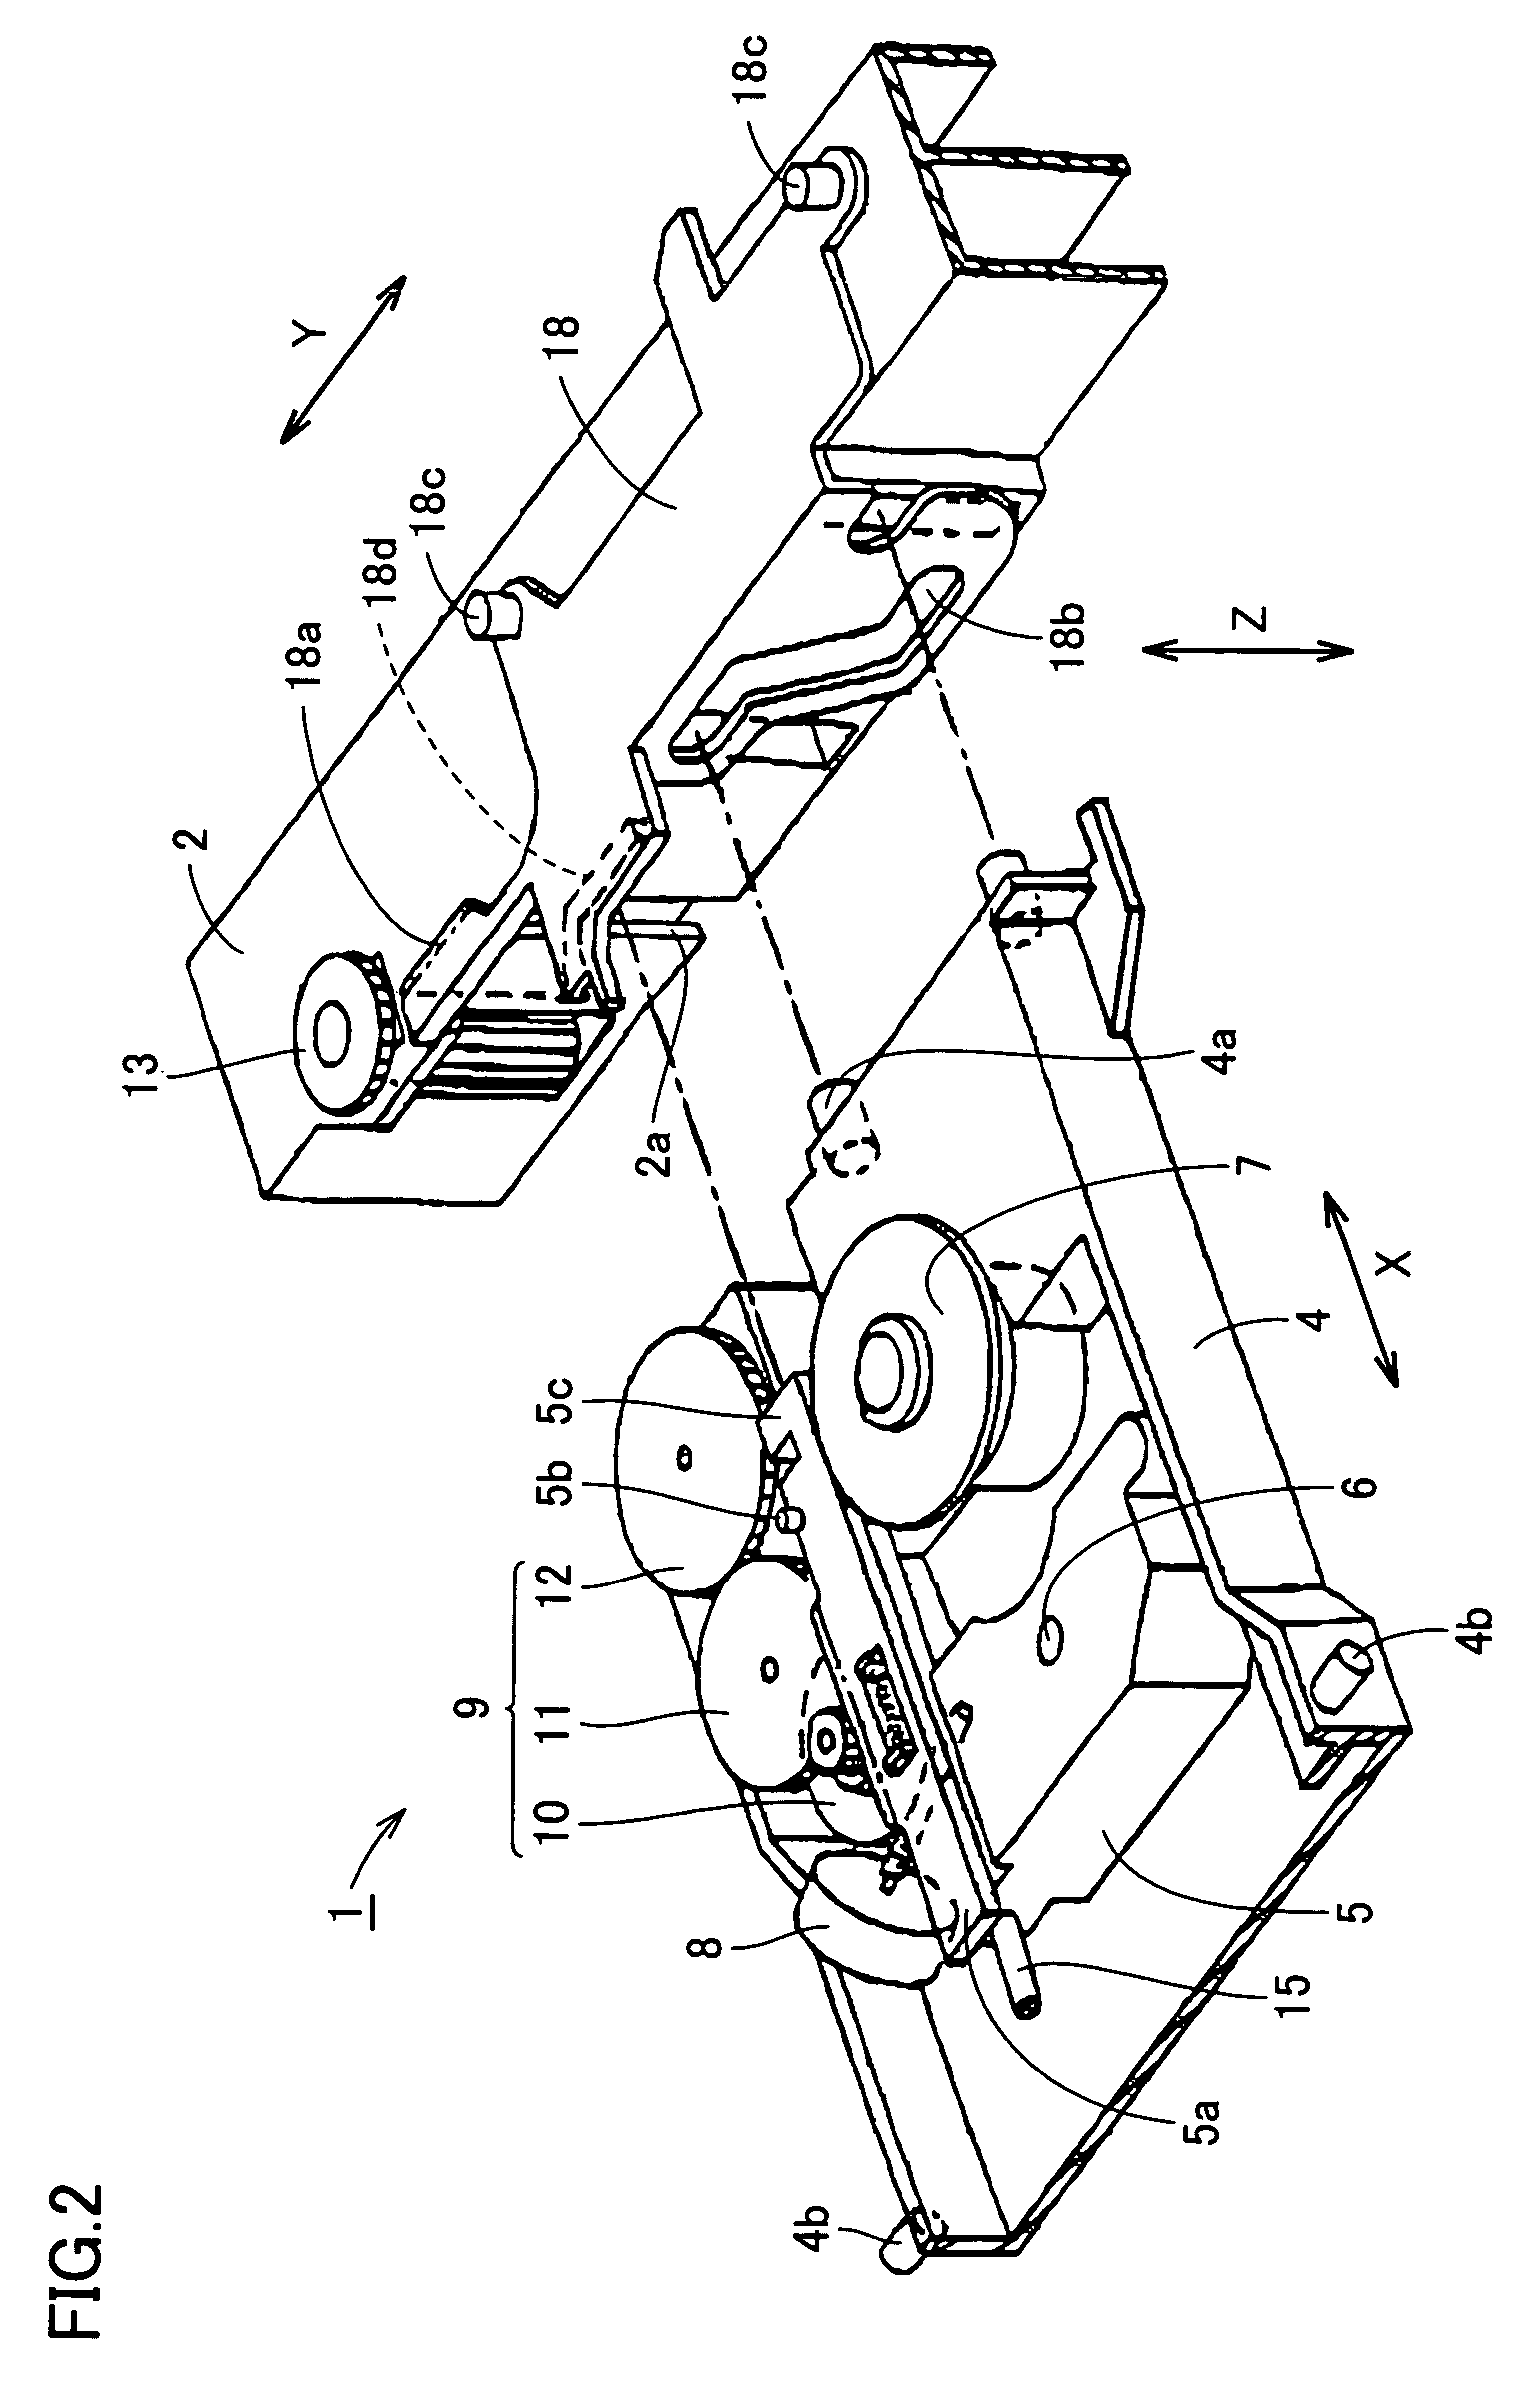 Locking mechanism for pickup unit of disc apparatus